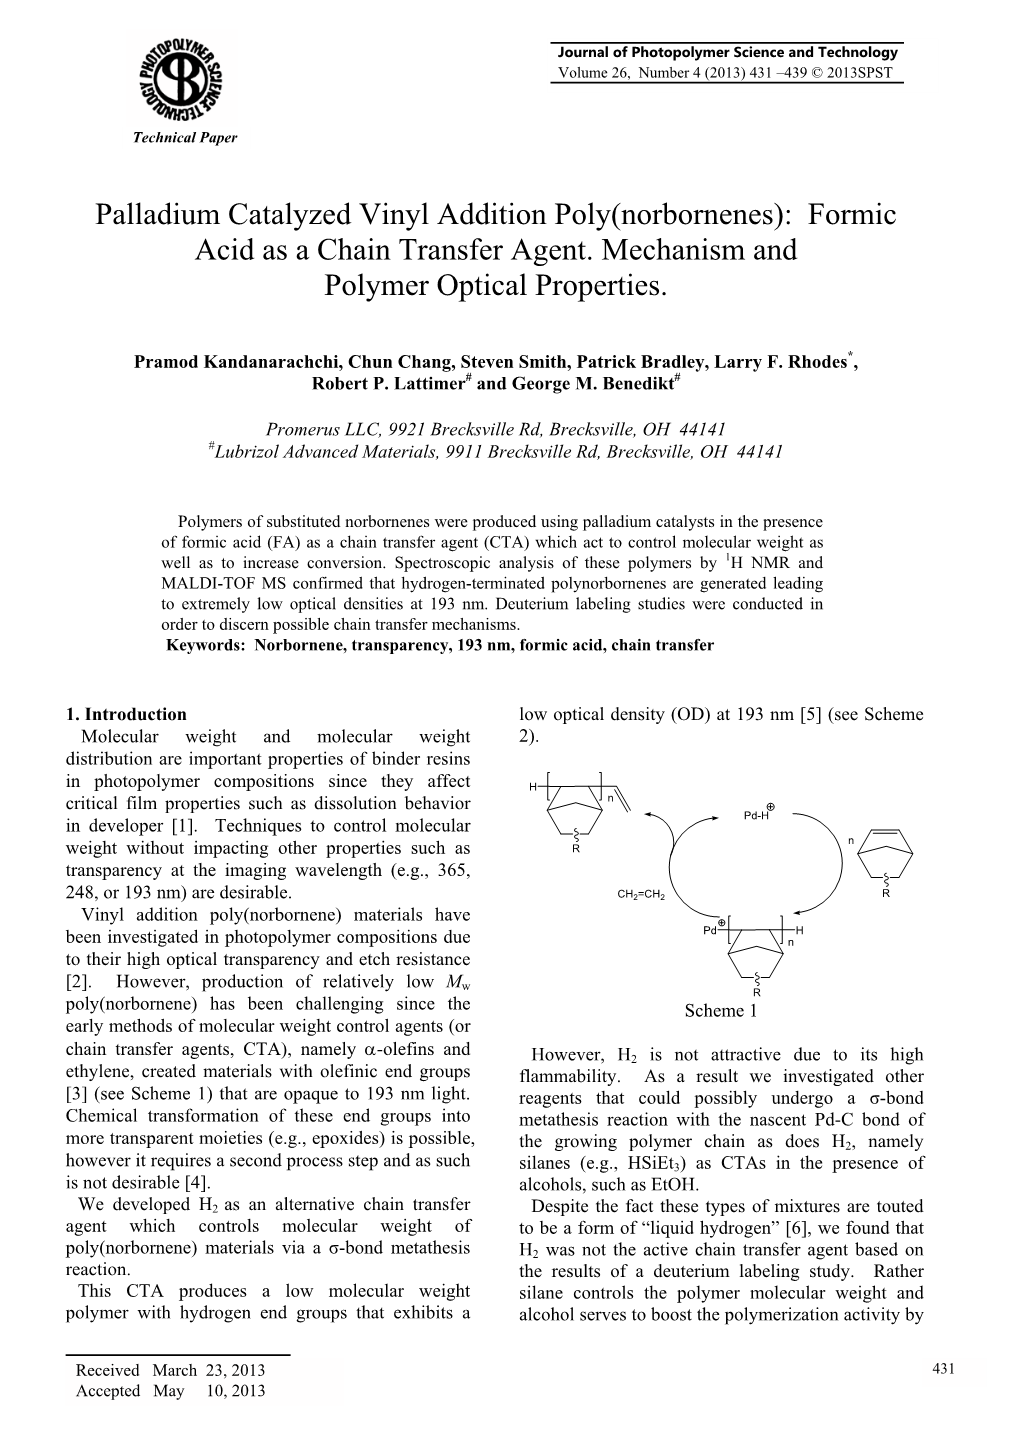 Palladium Catalyzed Vinyl Addition Poly(Norbornenes): Formic Acid As a Chain Transfer Agent